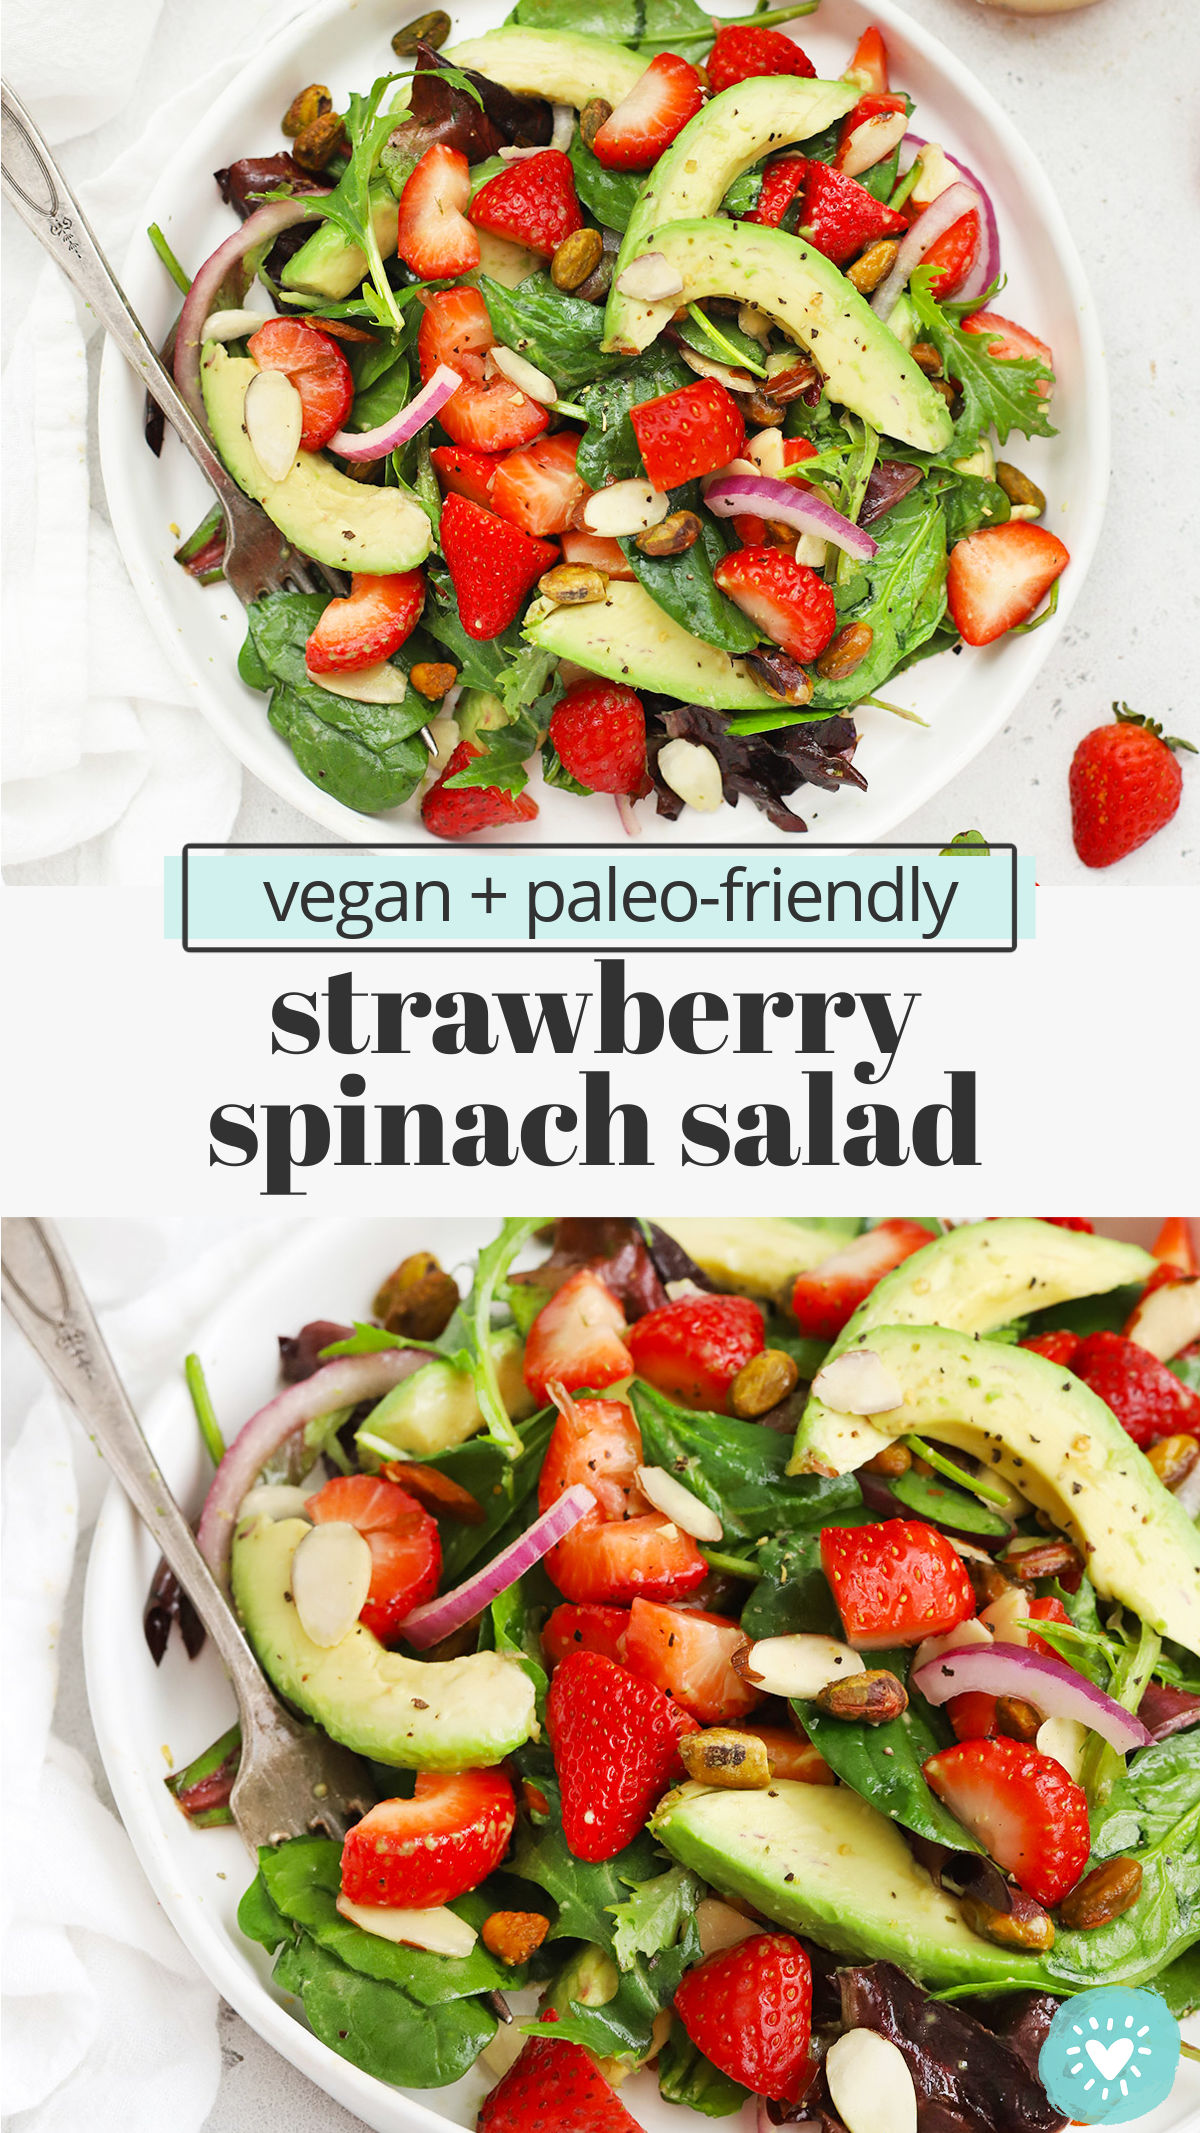 Strawberry Spinach Salad - This strawberry spinach salad recipe is light, bright, and so easy! You'll love the tangy dressing! (Vegan, Paleo) // Paleo Strawberry Spinach Salad // Vegan Strawberry Spinach Salad // Healthy Strawberry Spinach Salad // Gluten-Free Strawberry Spinach Salad // Spring Salad // summer salad recipe